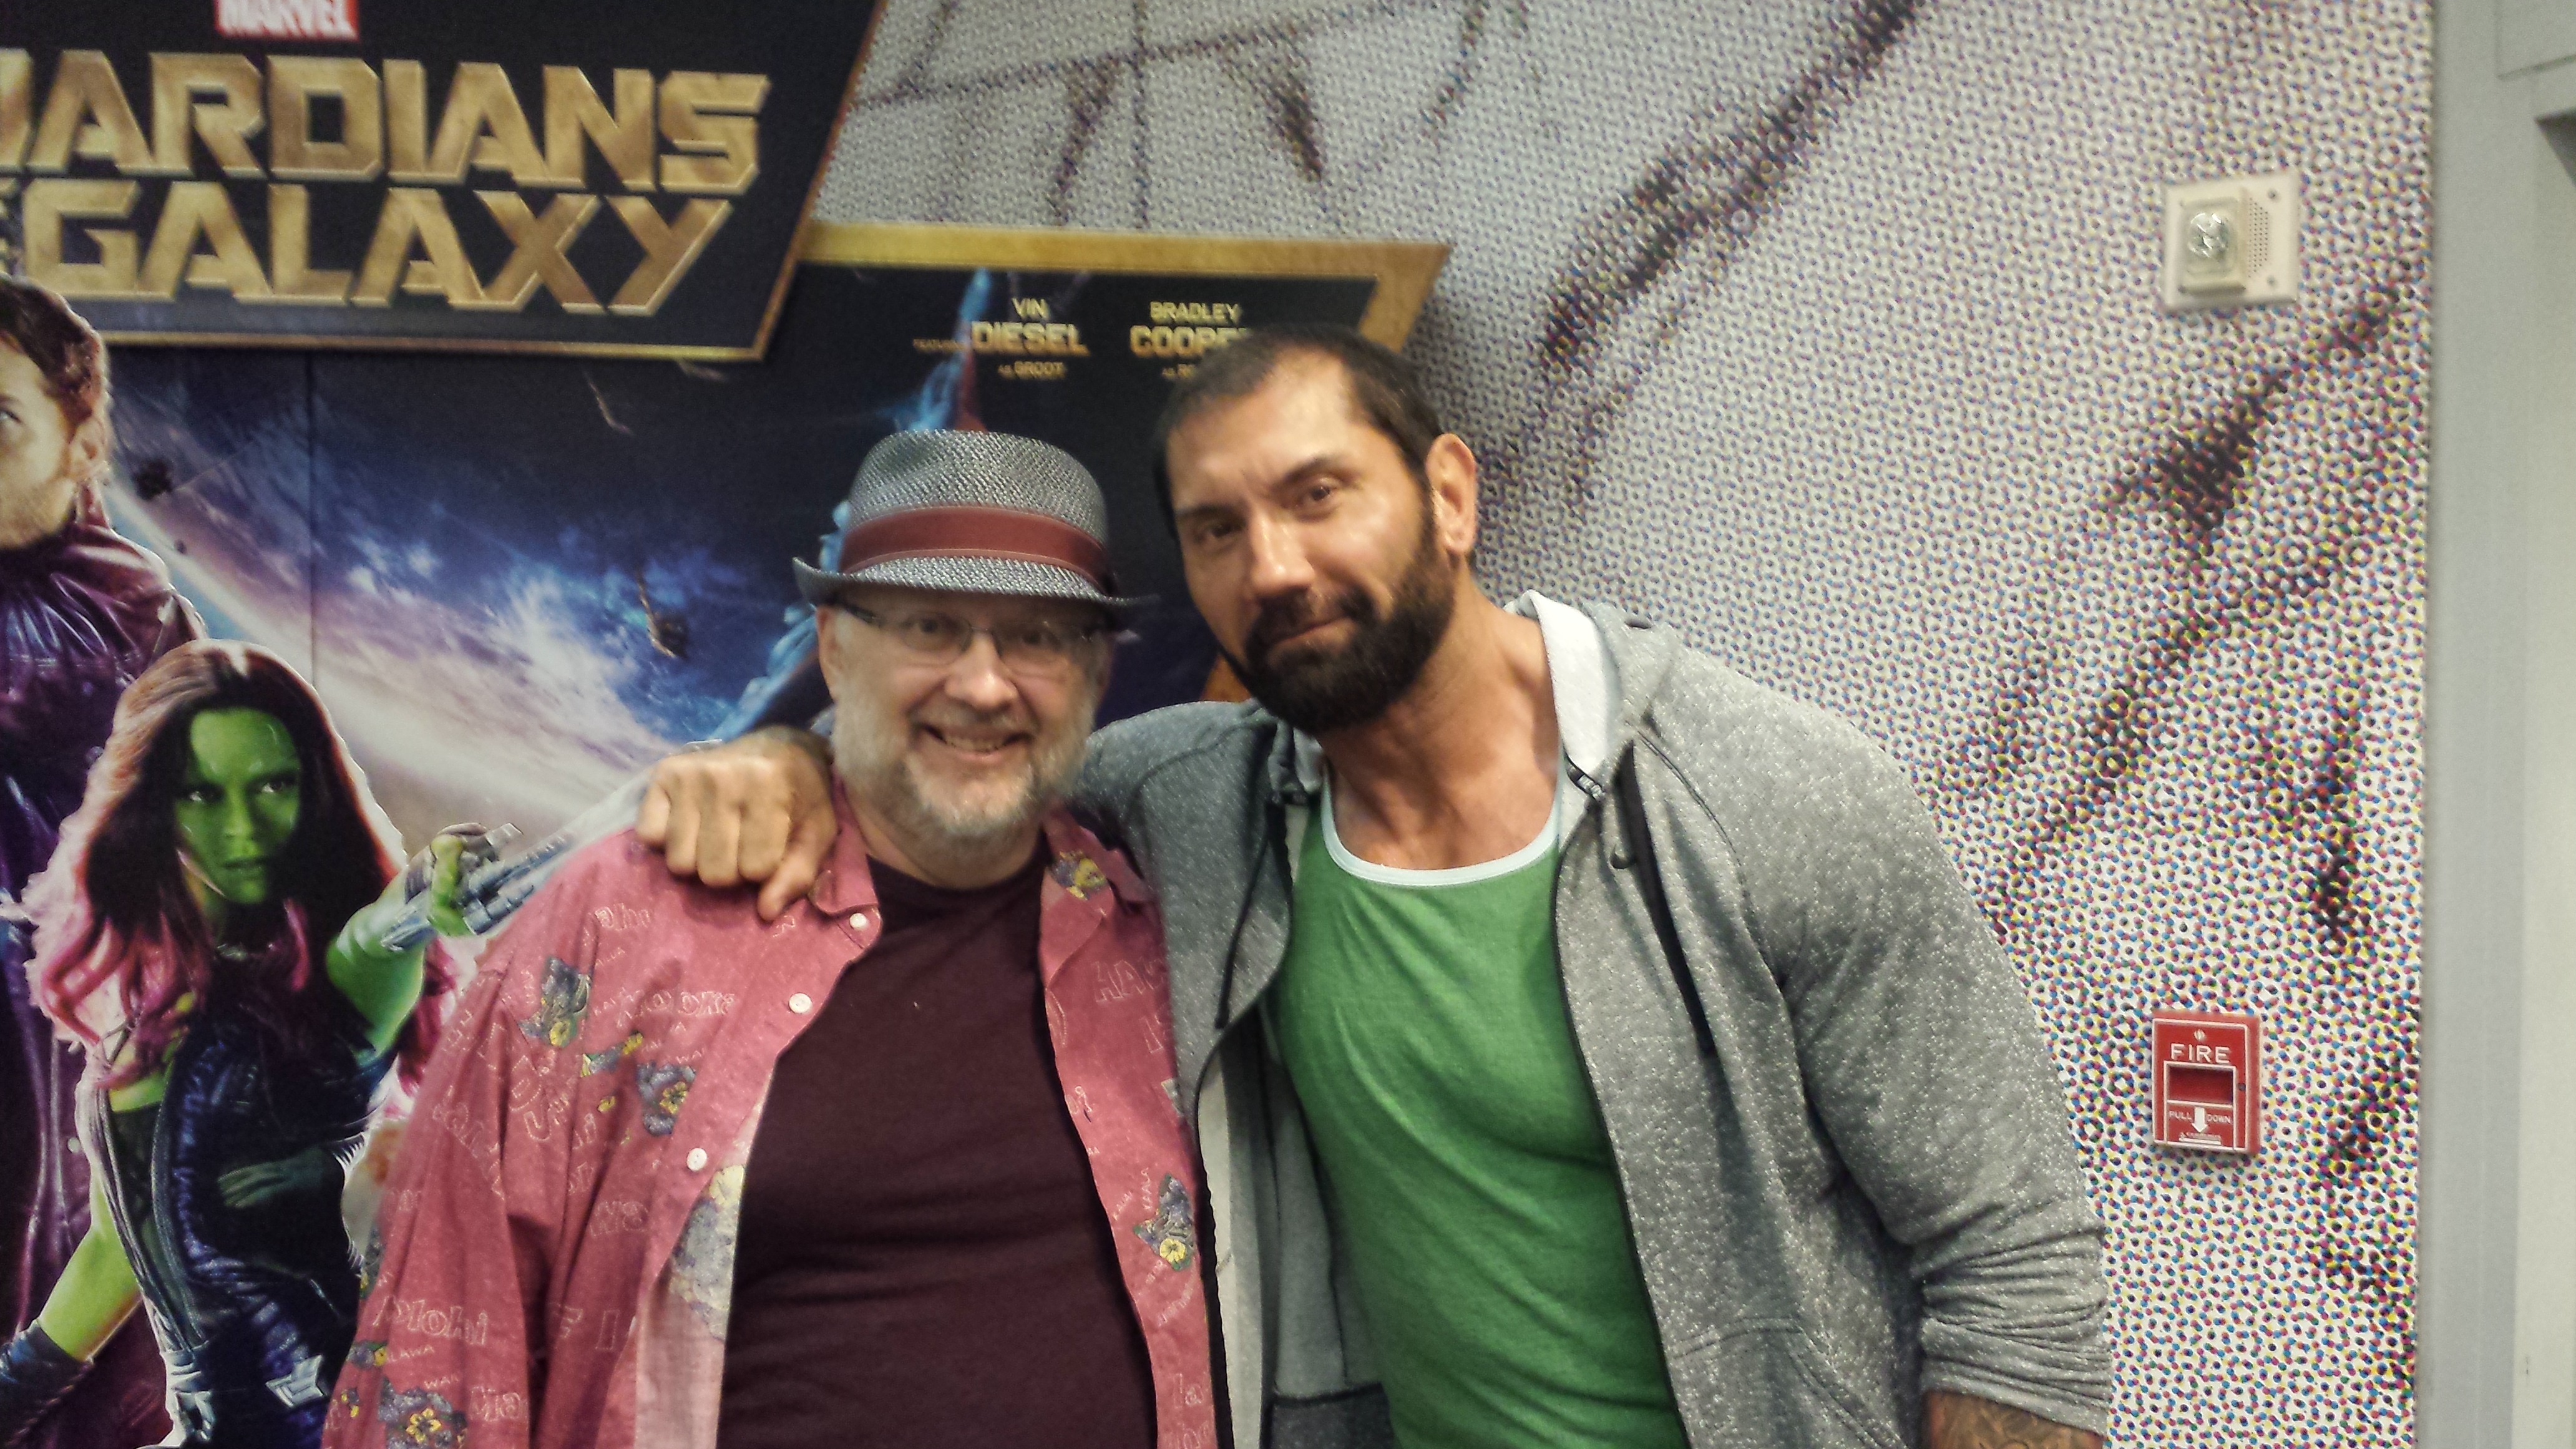 Joe Ochman & Dave Bautista (Drax) at Disney for a private screening of Marvel's Guardians of the Galaxy.